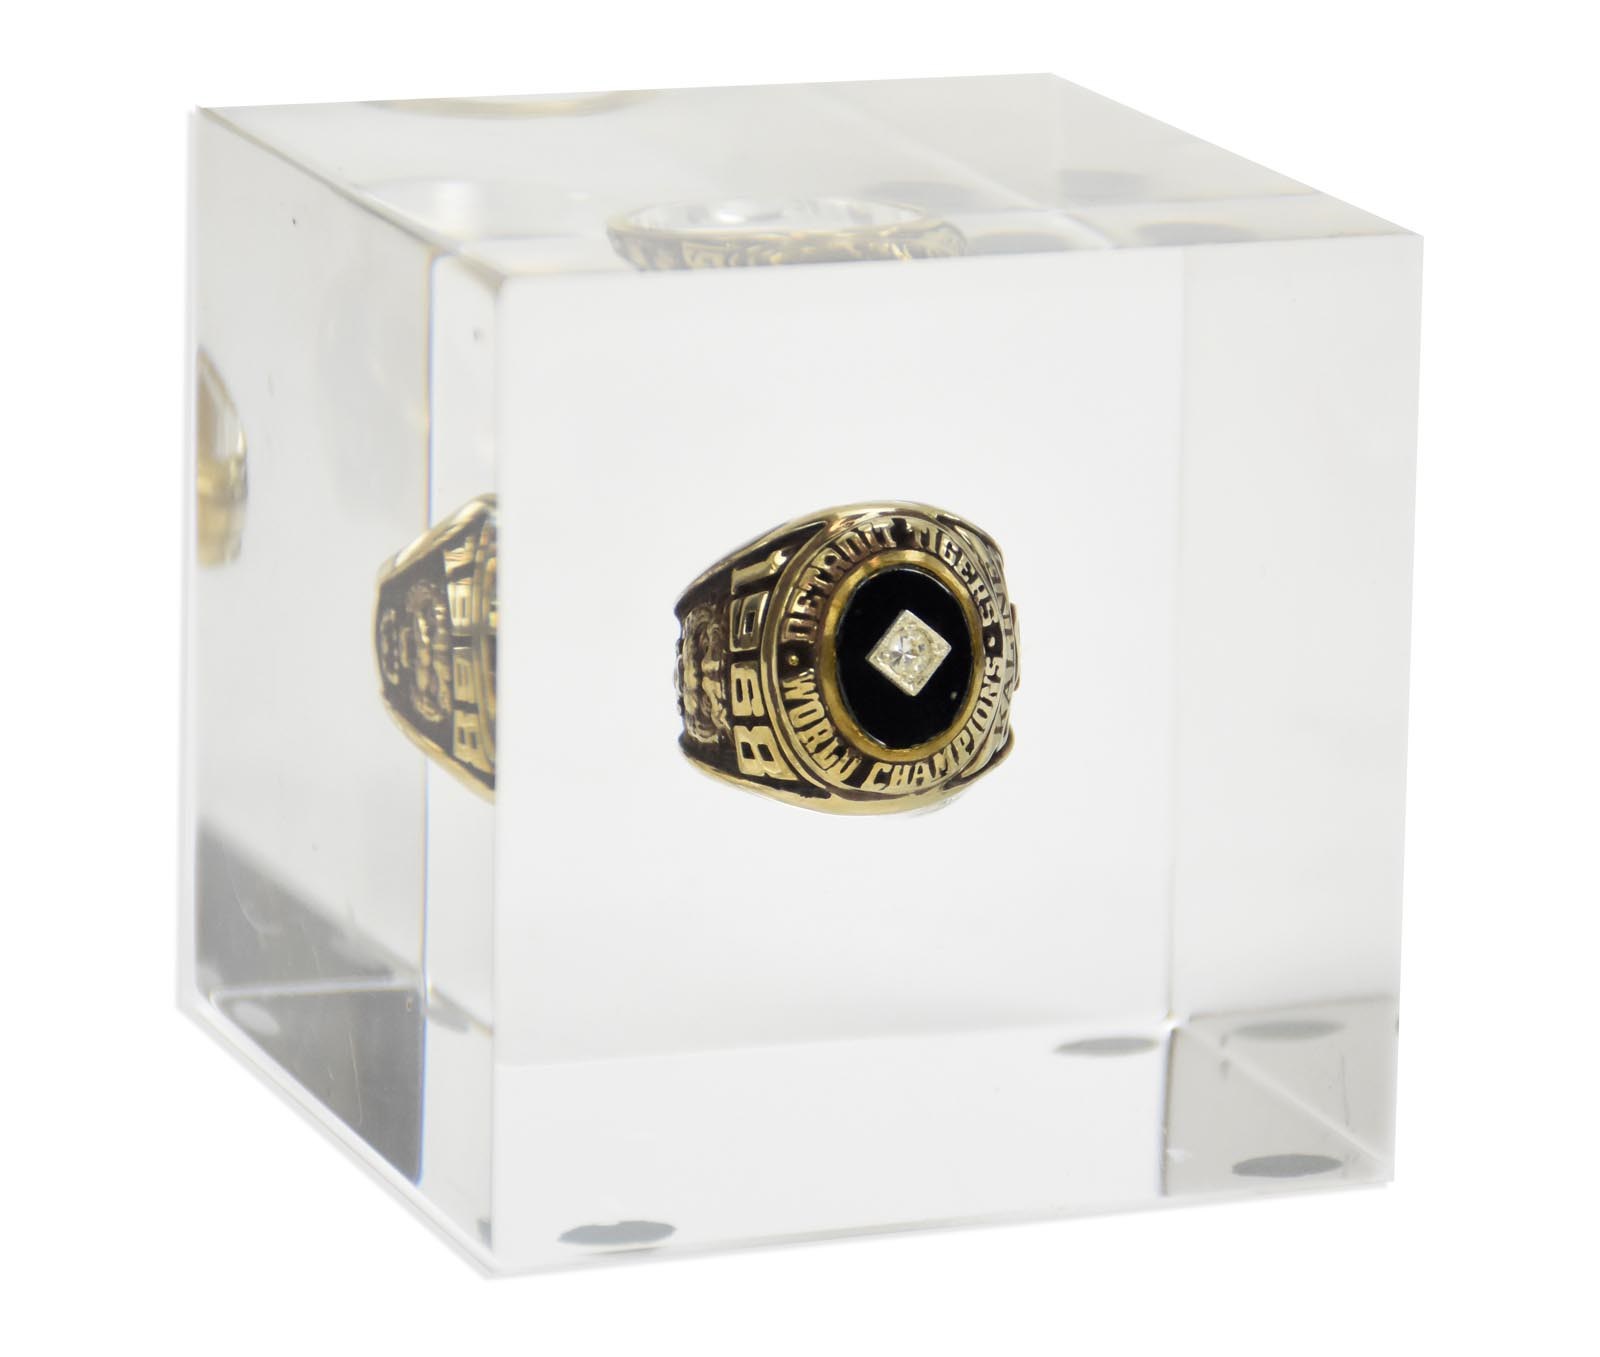 - 1968 Detroit Tigers World Championship Ring in Lucite